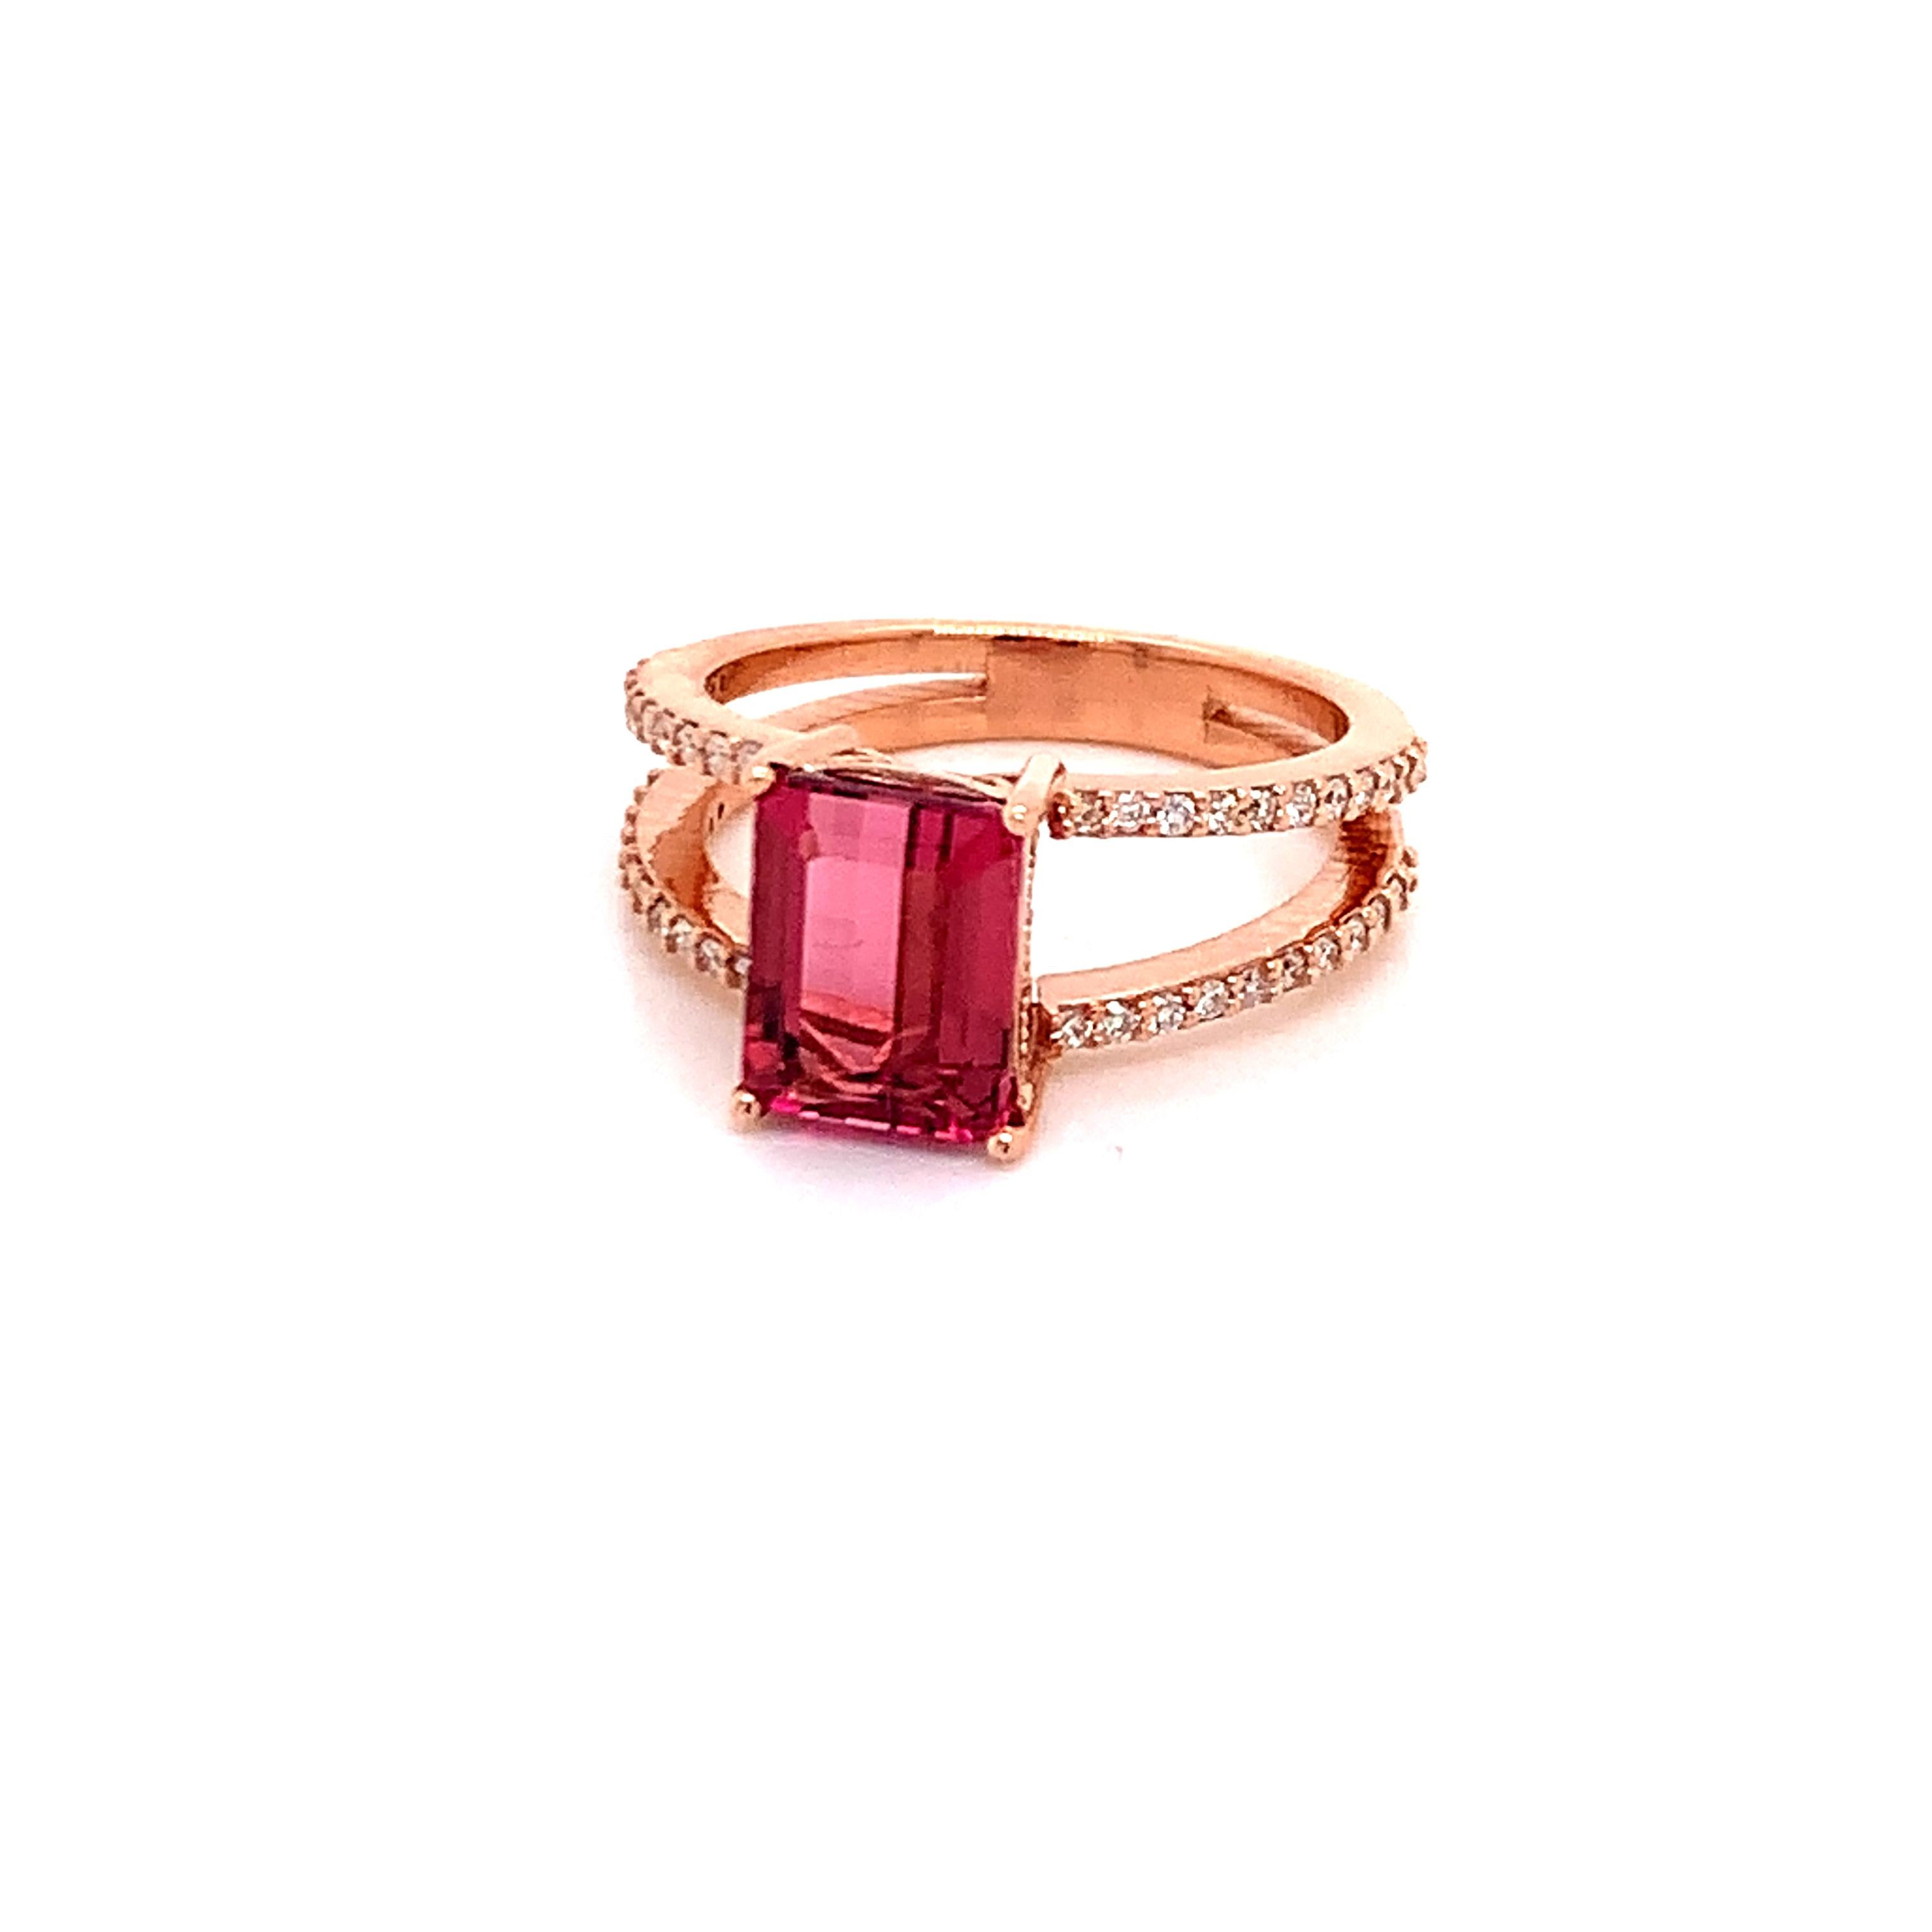 Natural Tourmaline Diamond Ring 14k Rose Gold 2.2 TCW Certified In New Condition For Sale In Brooklyn, NY